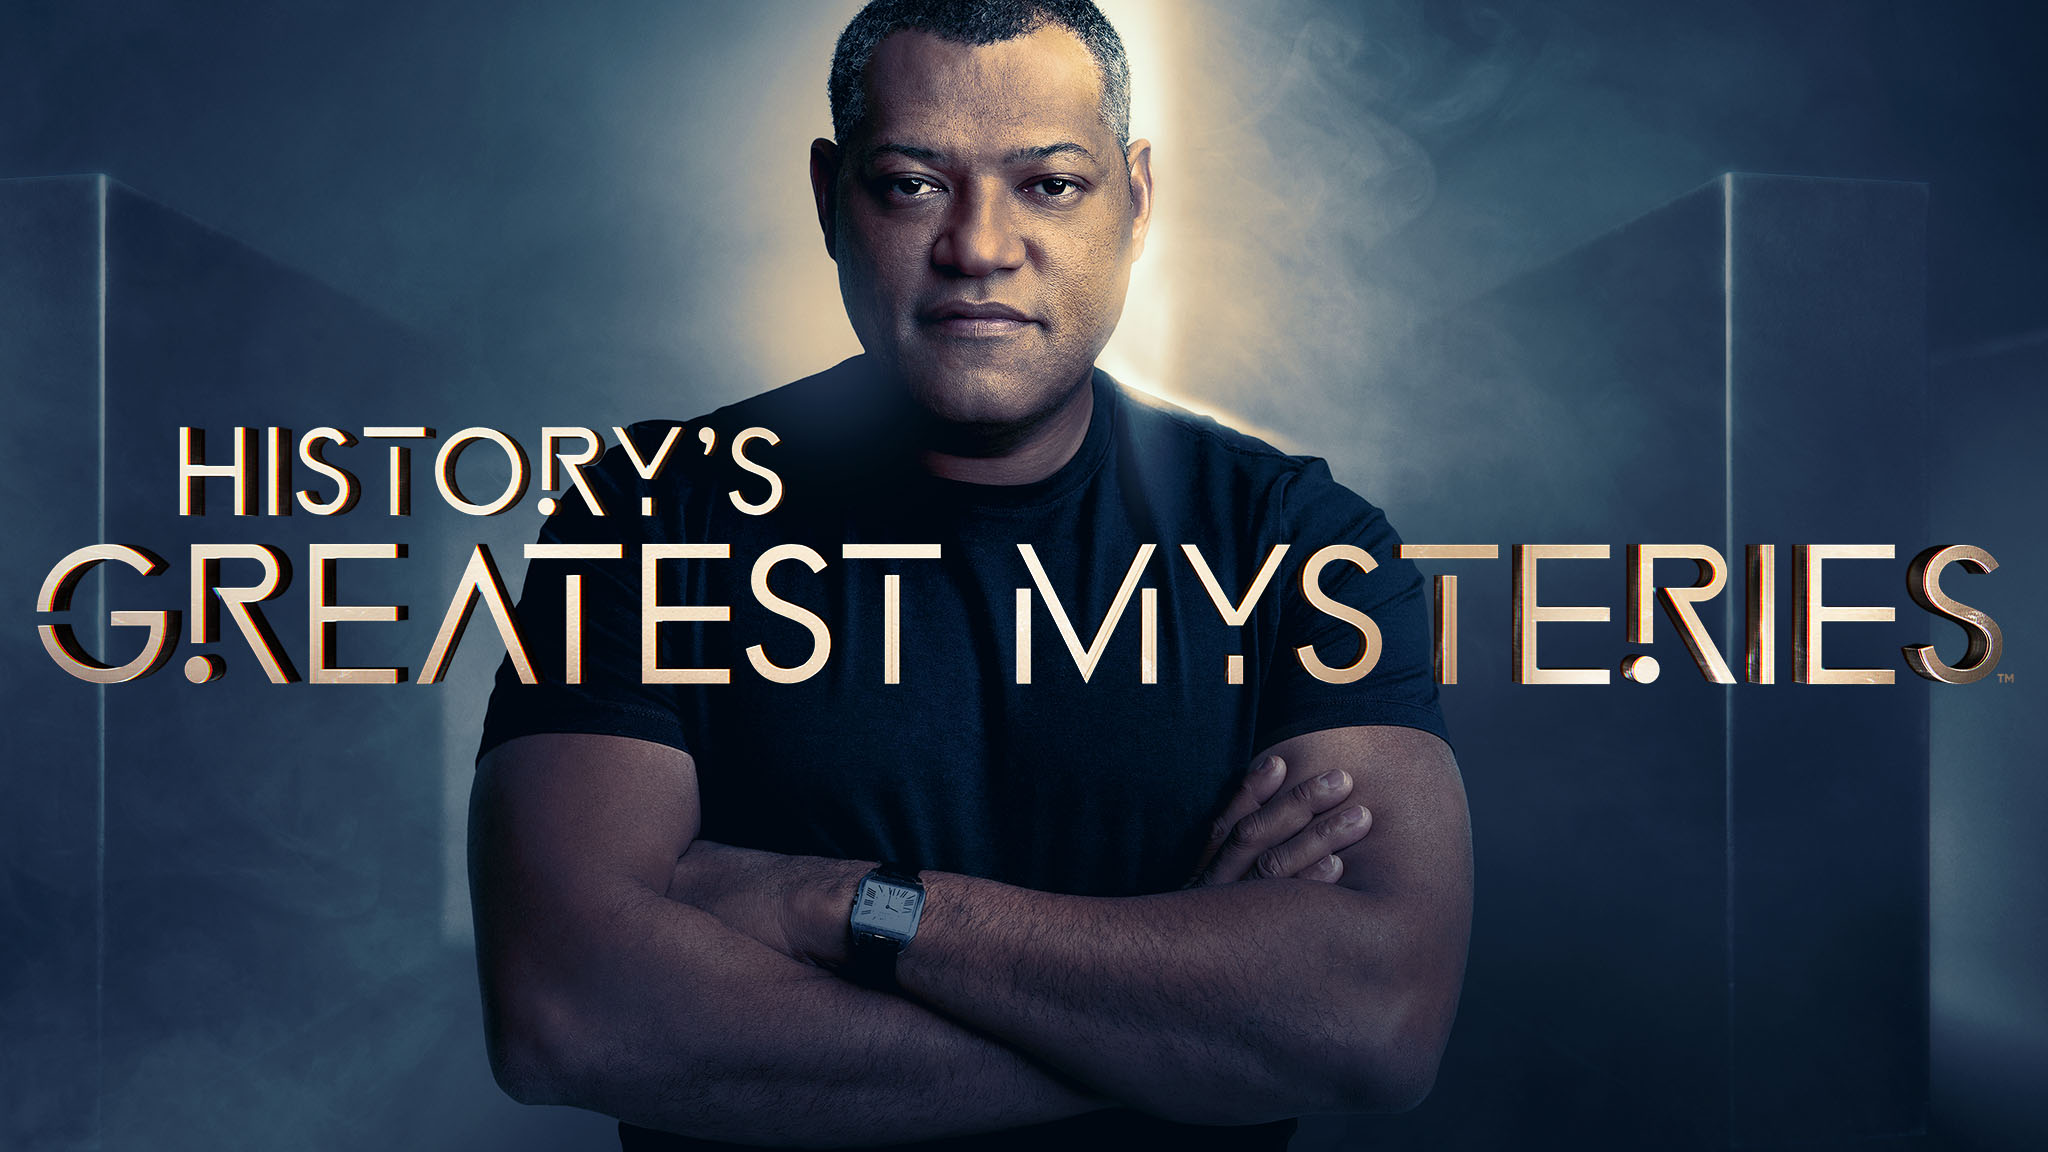 Watch 'History's Greatest Mysteries' on HISTORY Vault	